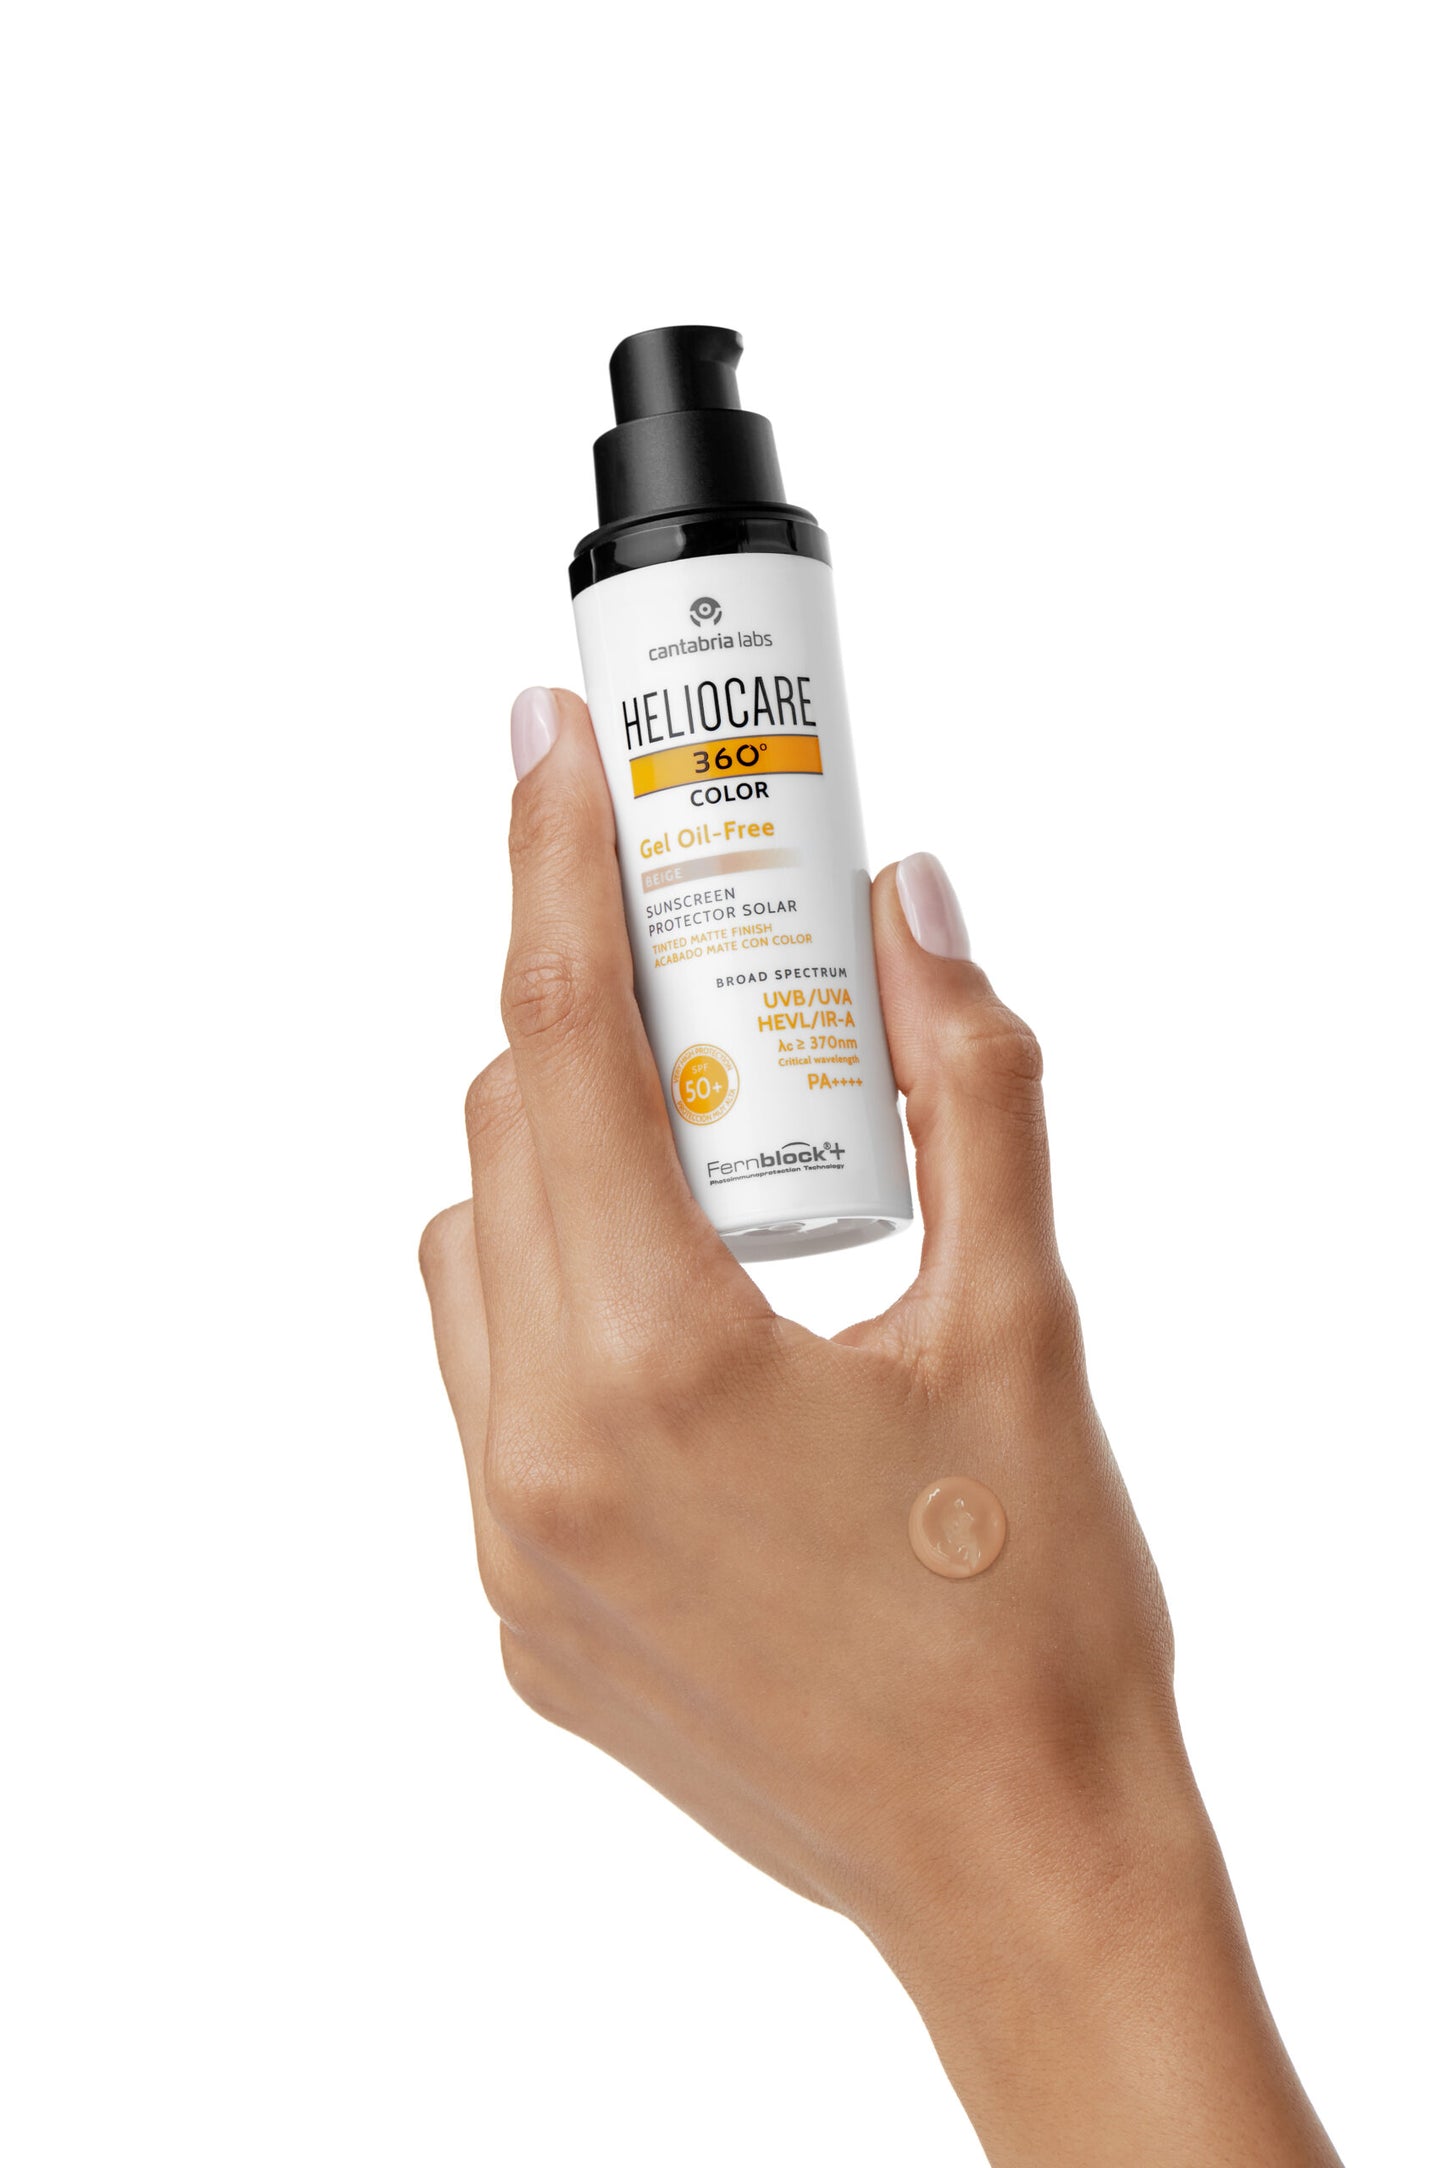 Heliocare 360 SPF50 Tinted Oil Free